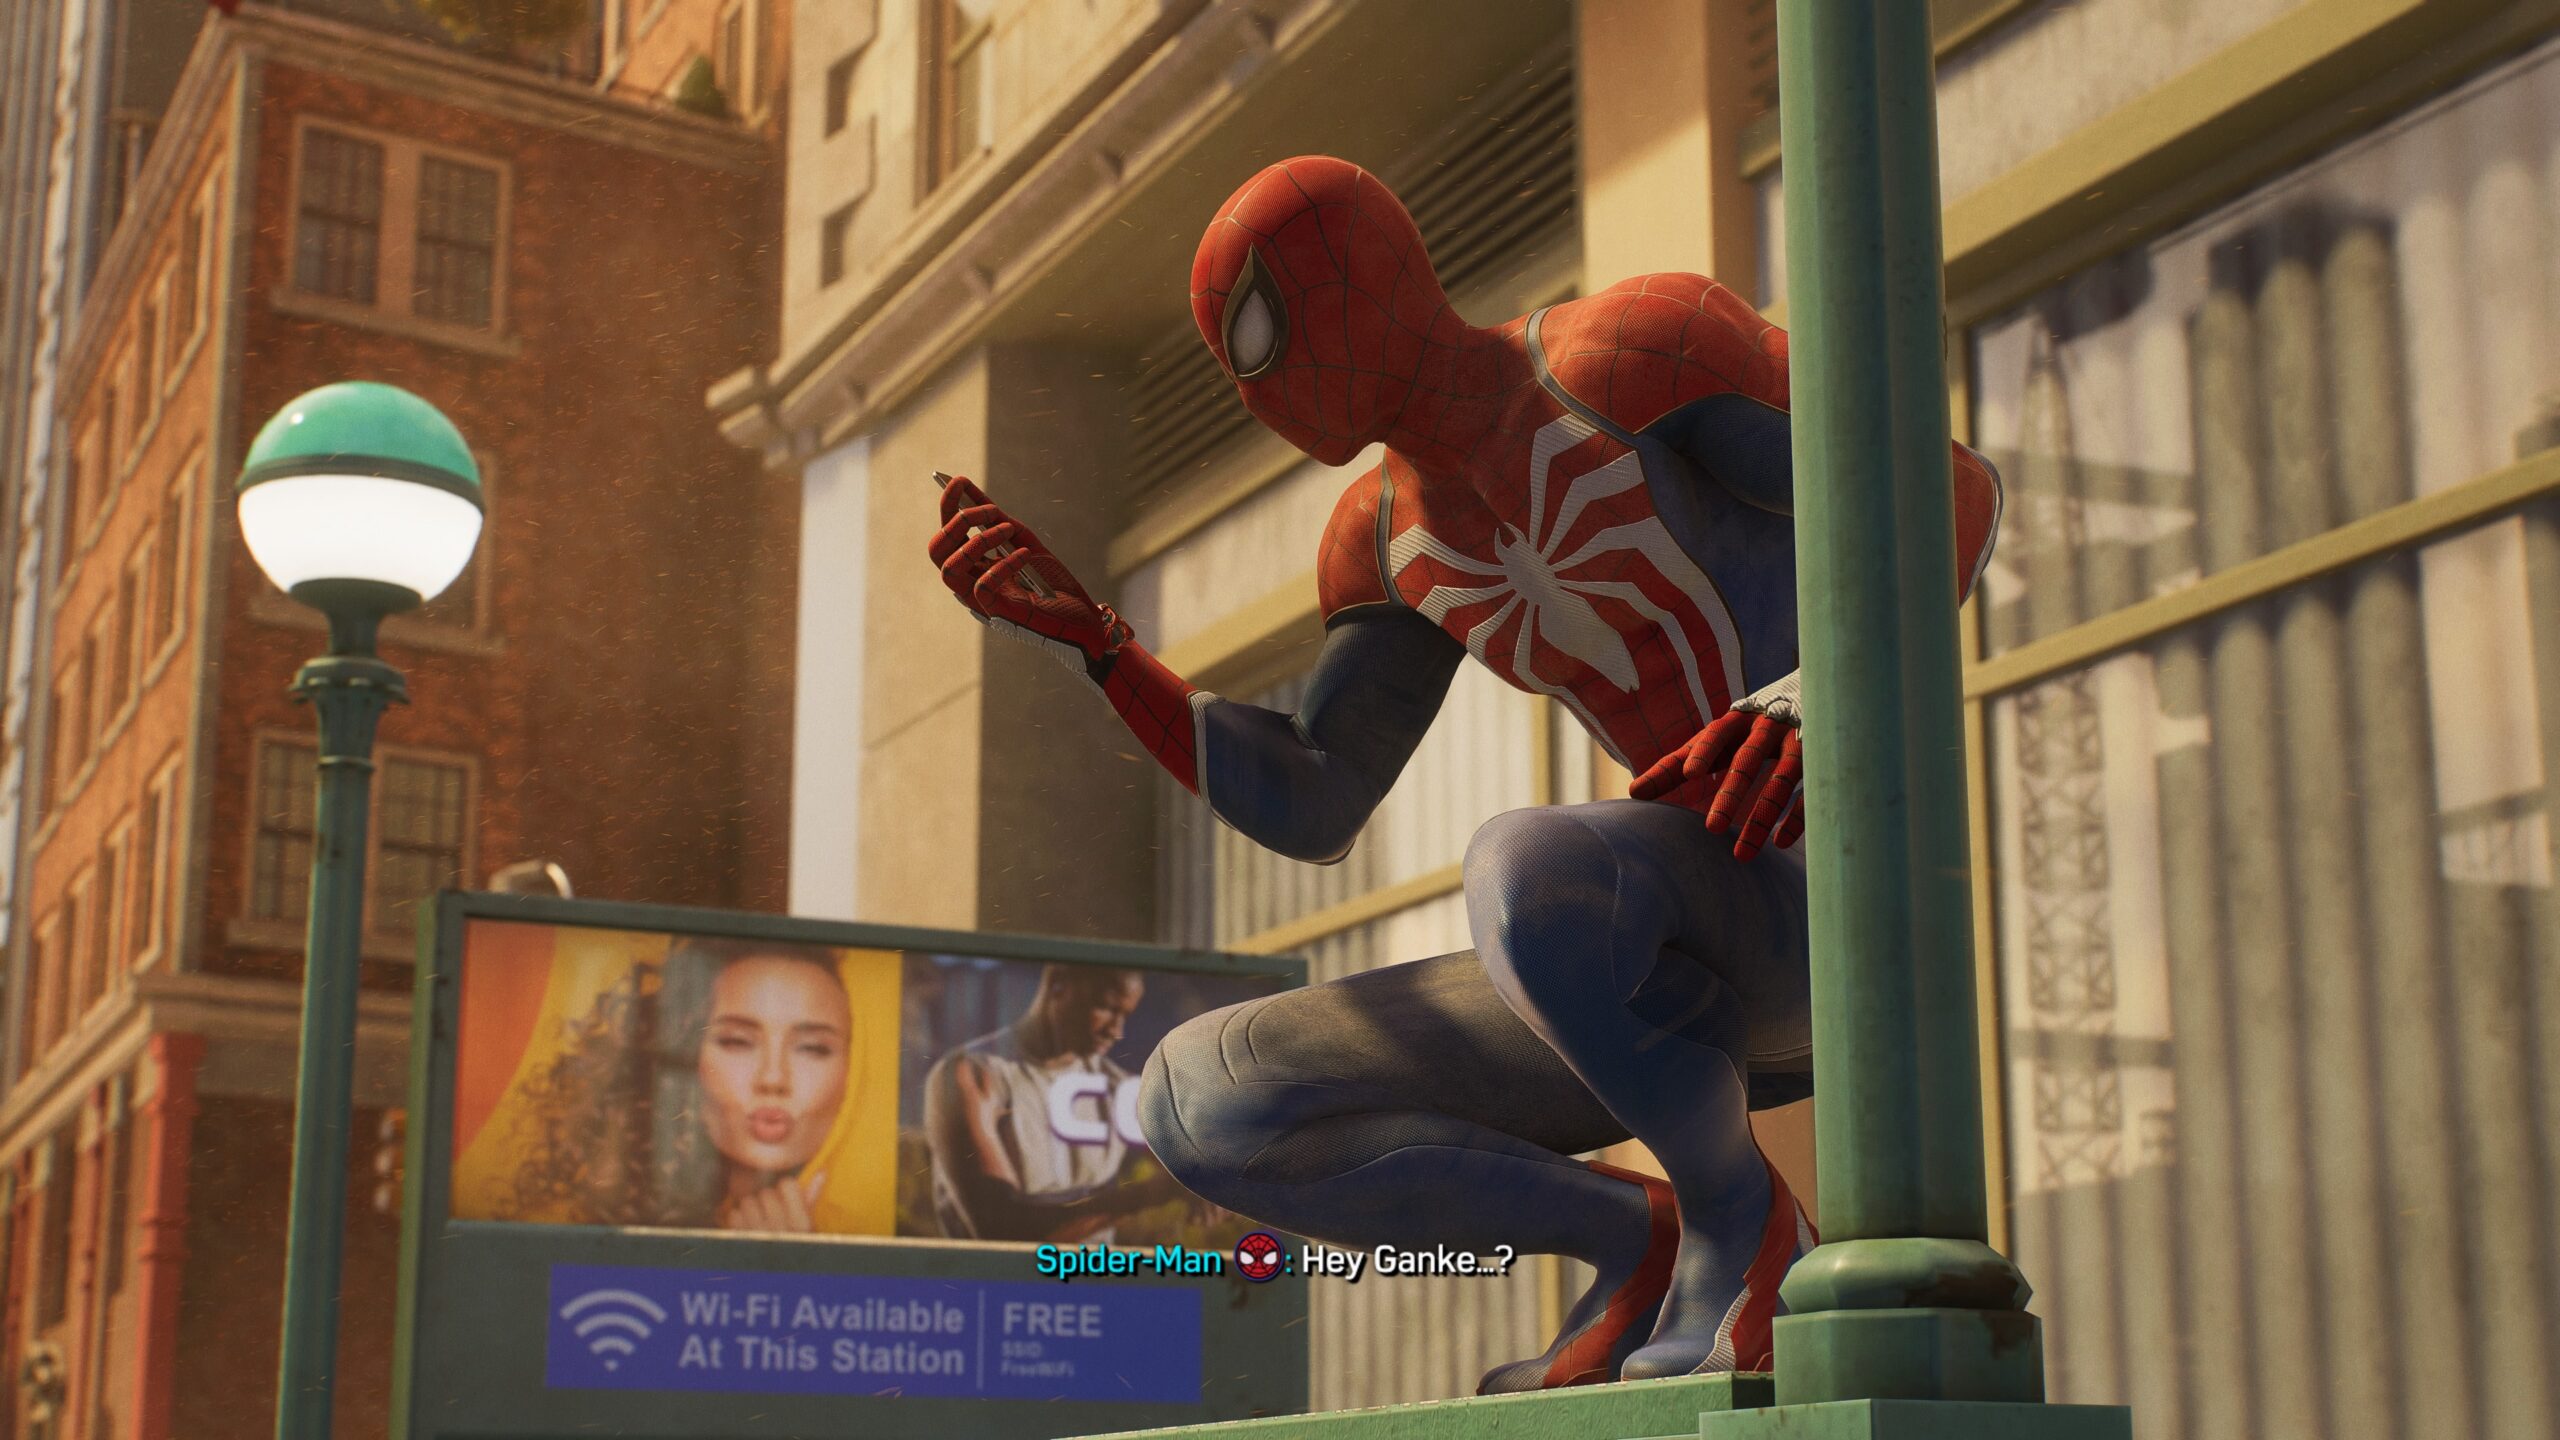 With the release of Spider-Man 2 on PS5 this fall, I think